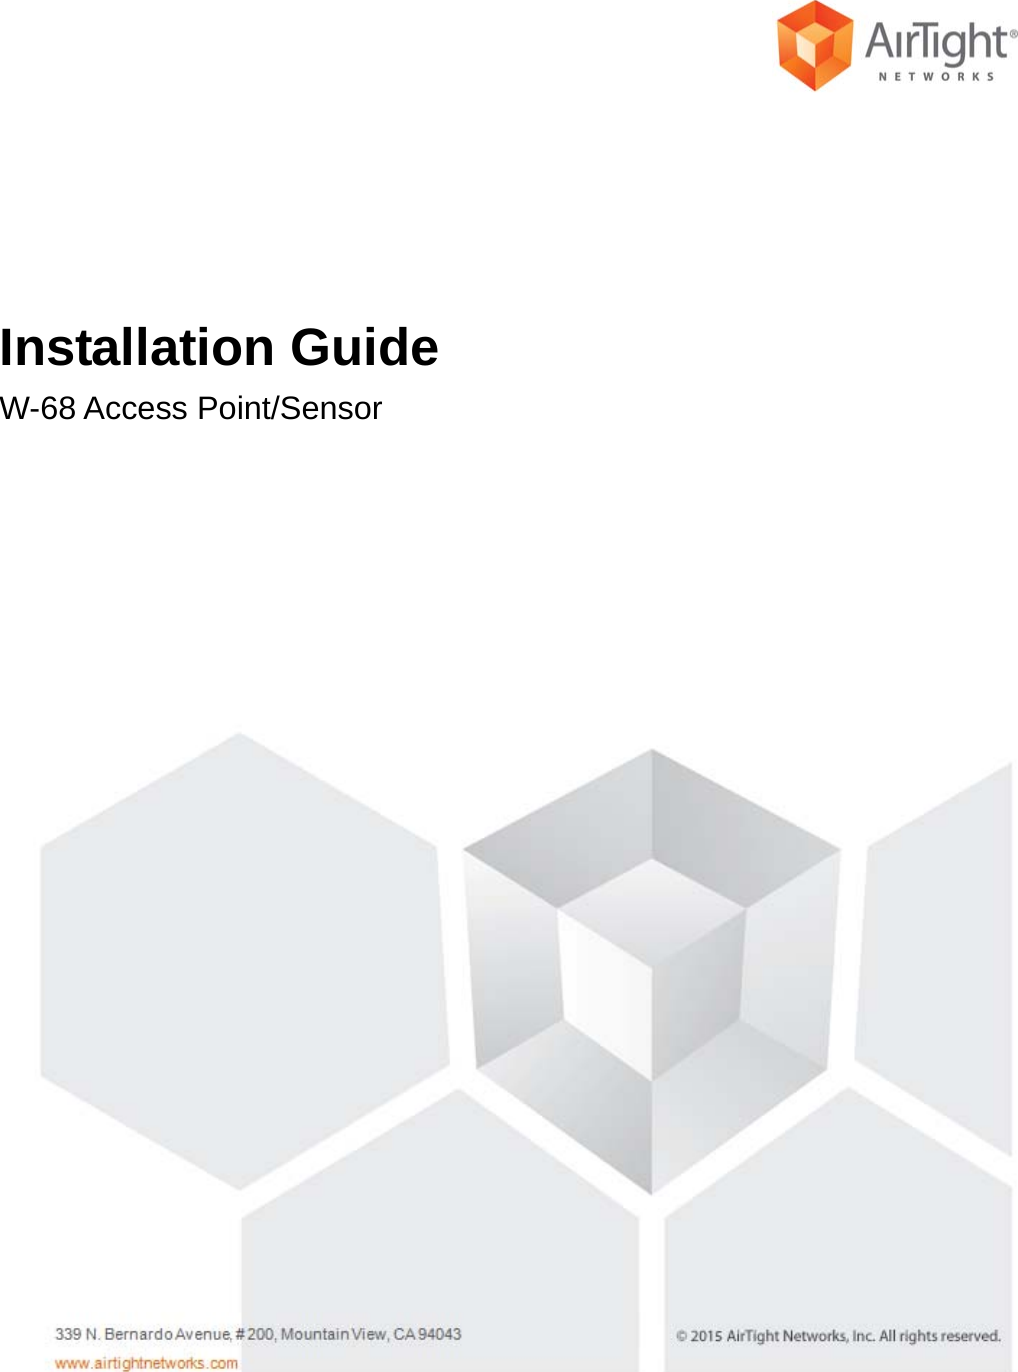           Installation Guide W-68 Access Point/Sensor          